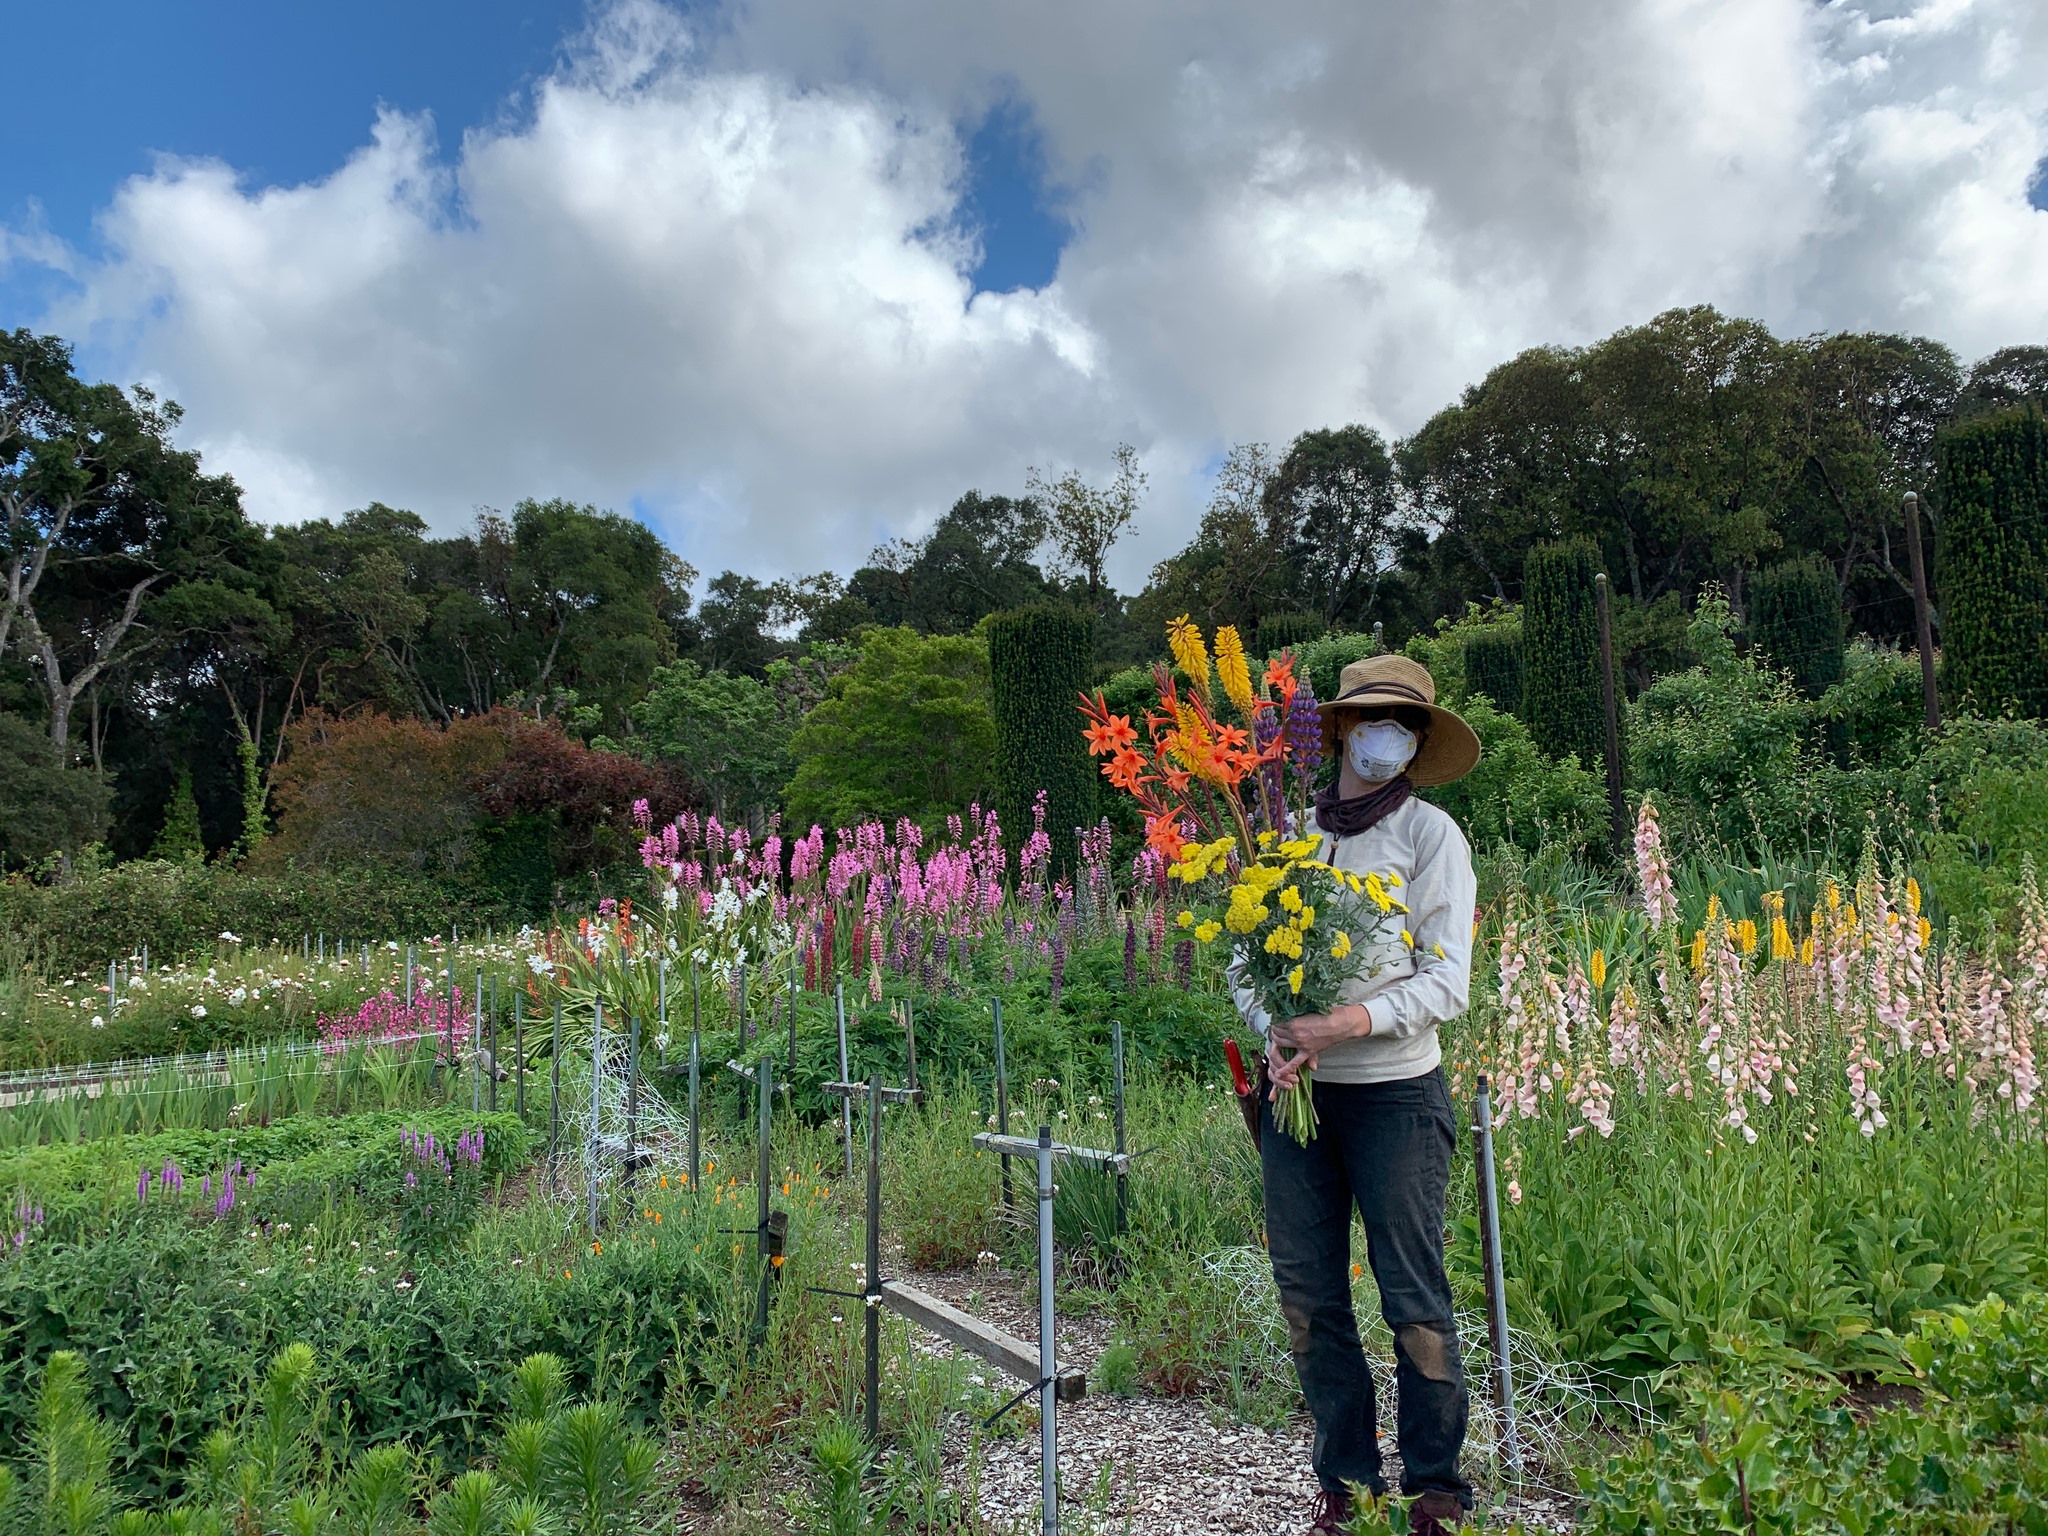 General Support consists of single-day, seasonal and short term projects in the Horticulture and Collections departments. These assignments do not usually require additional training beyond the initial volunteer orientation. There is no minimum service hours requirement to participate in General Support.